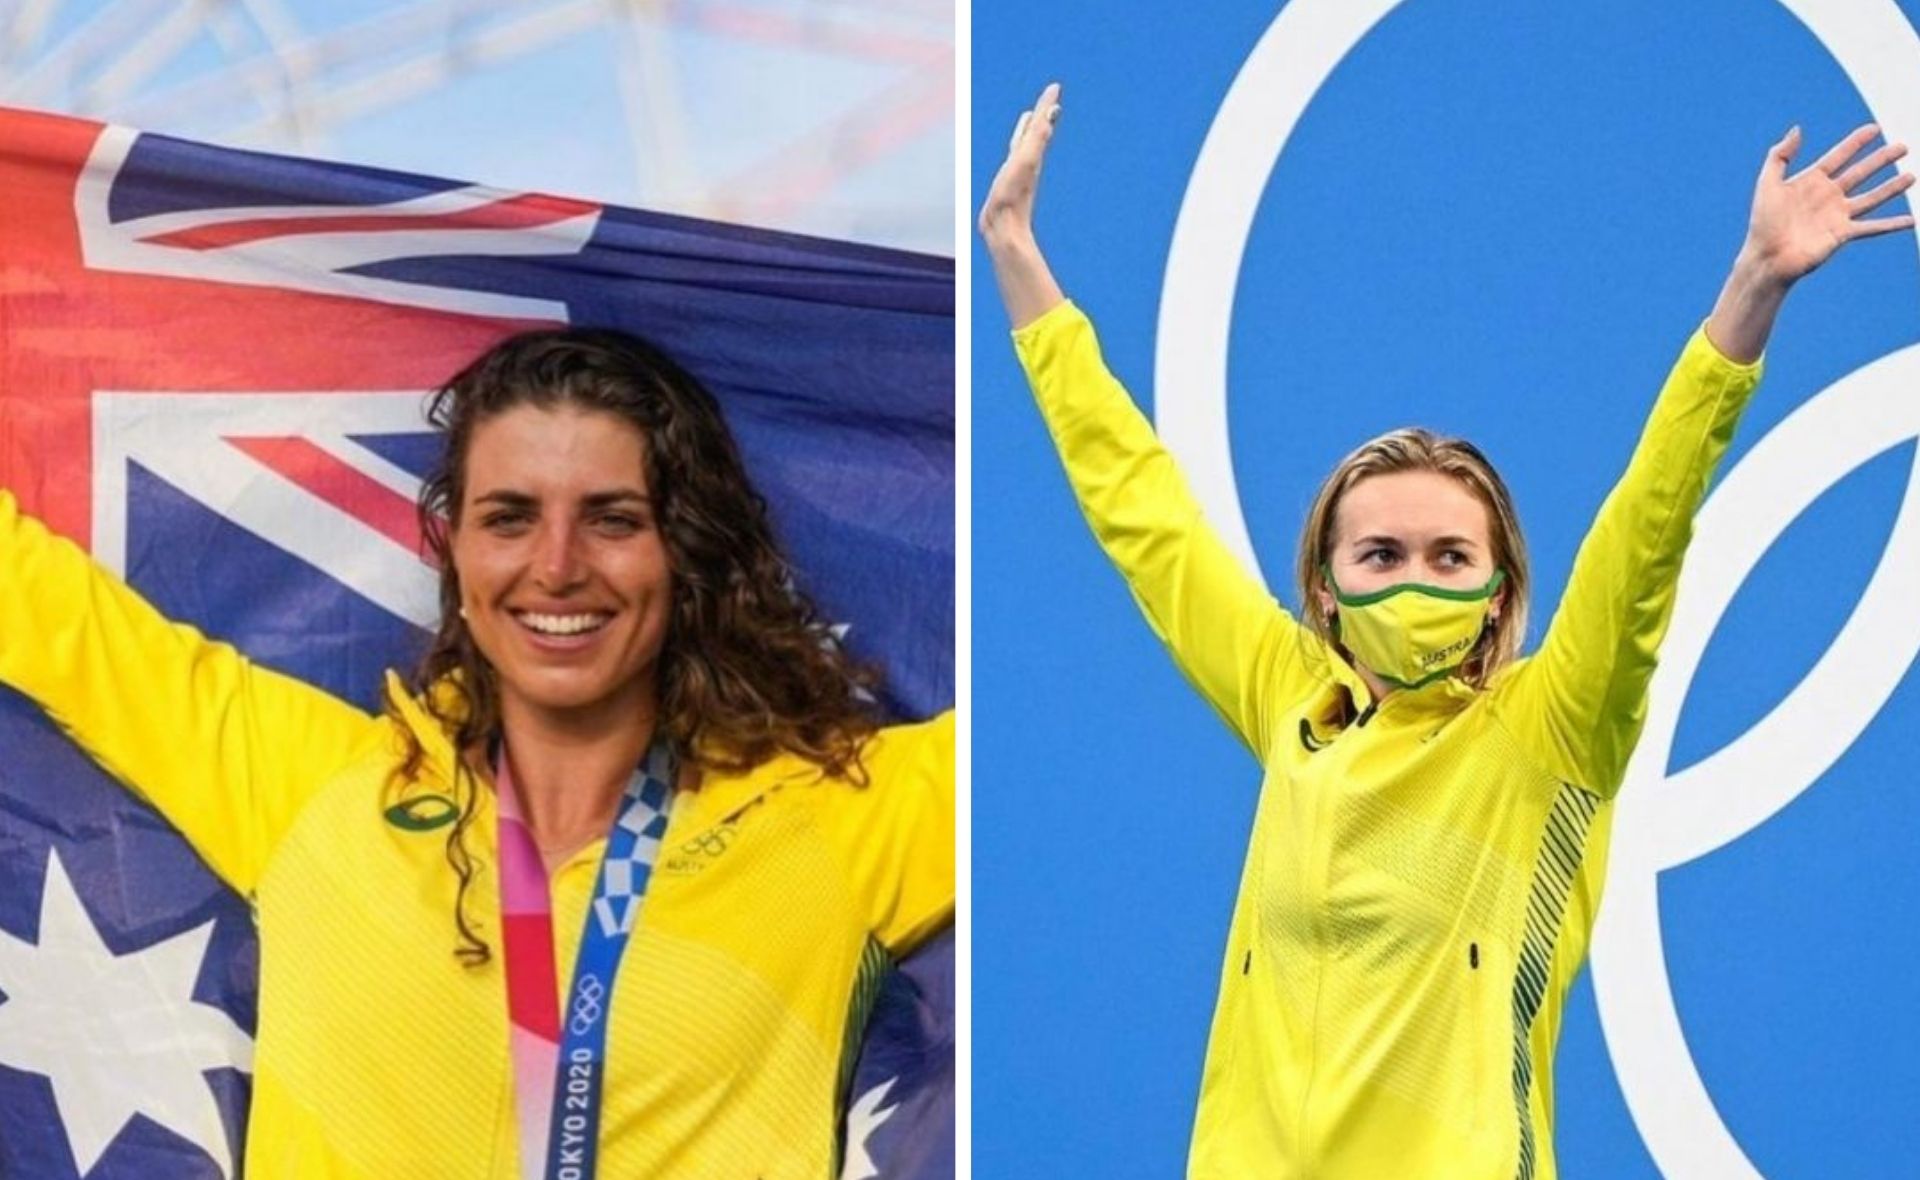 Our champions! The incredible Aussie women who have won gold at Japan’s 2020 Olympics